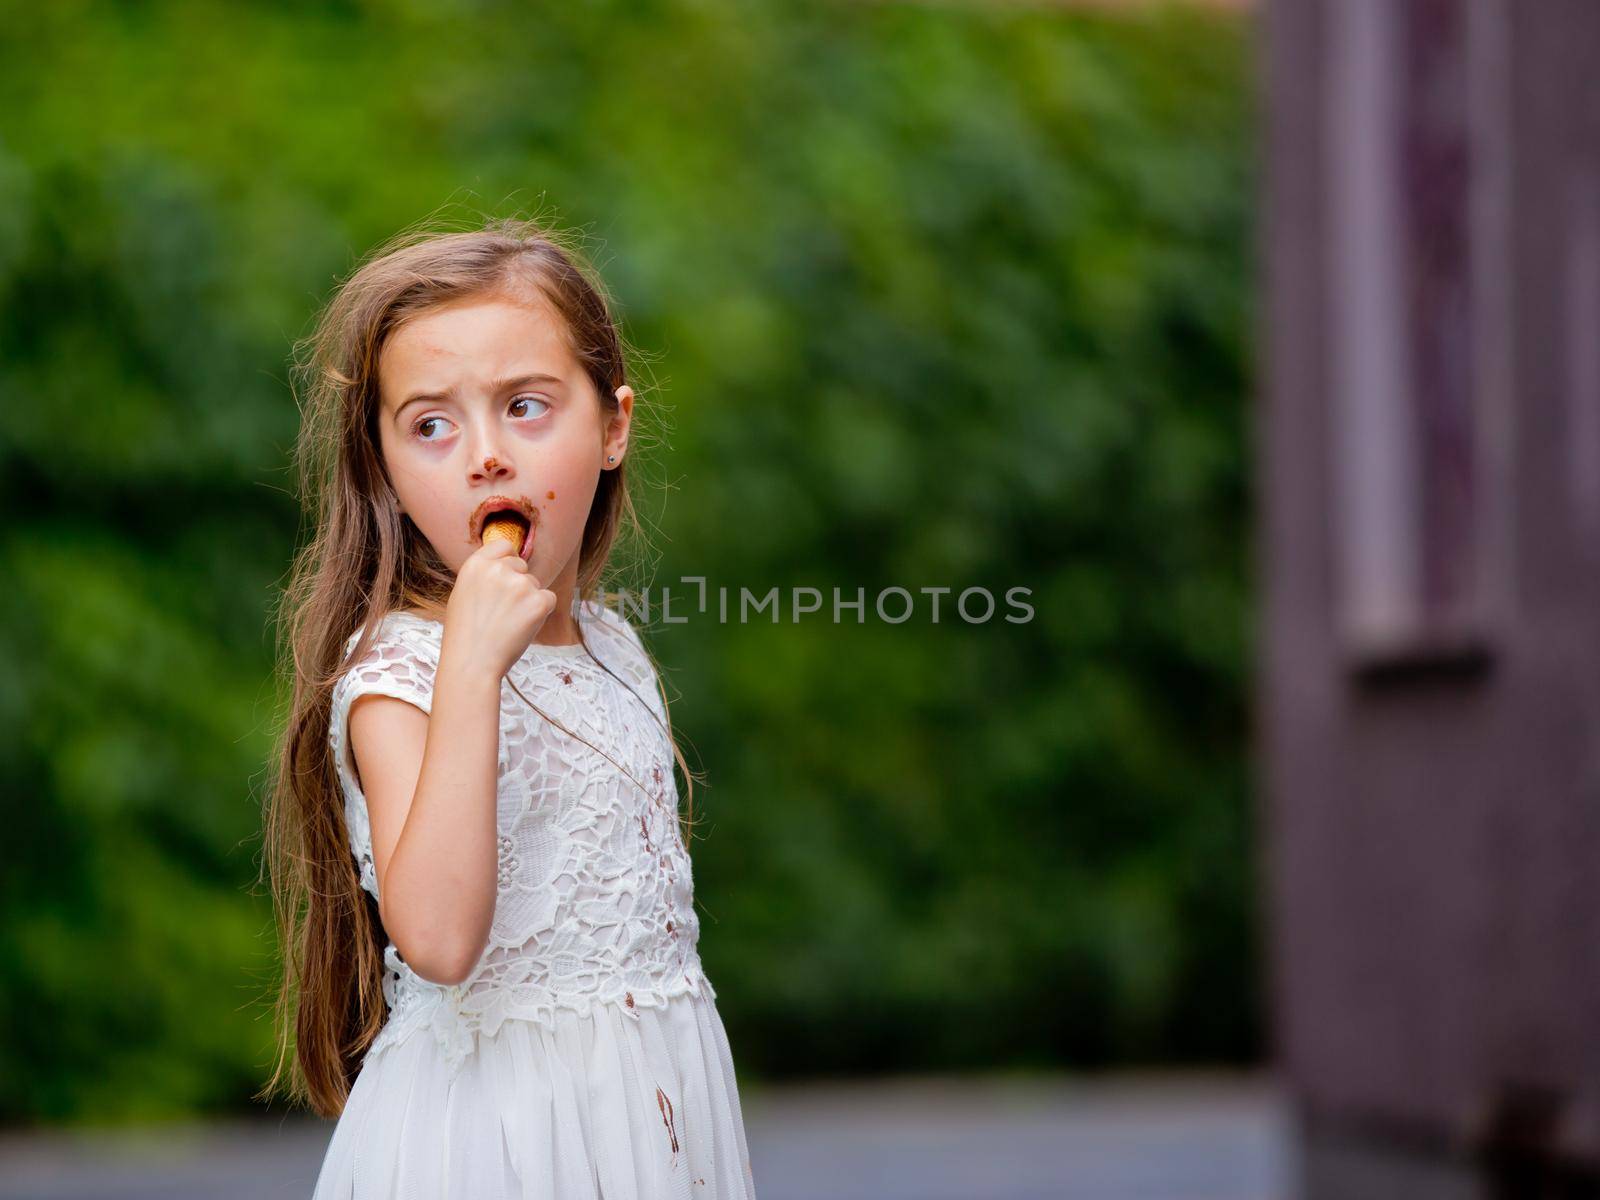 A little girl in a white dress is eating ice cream.